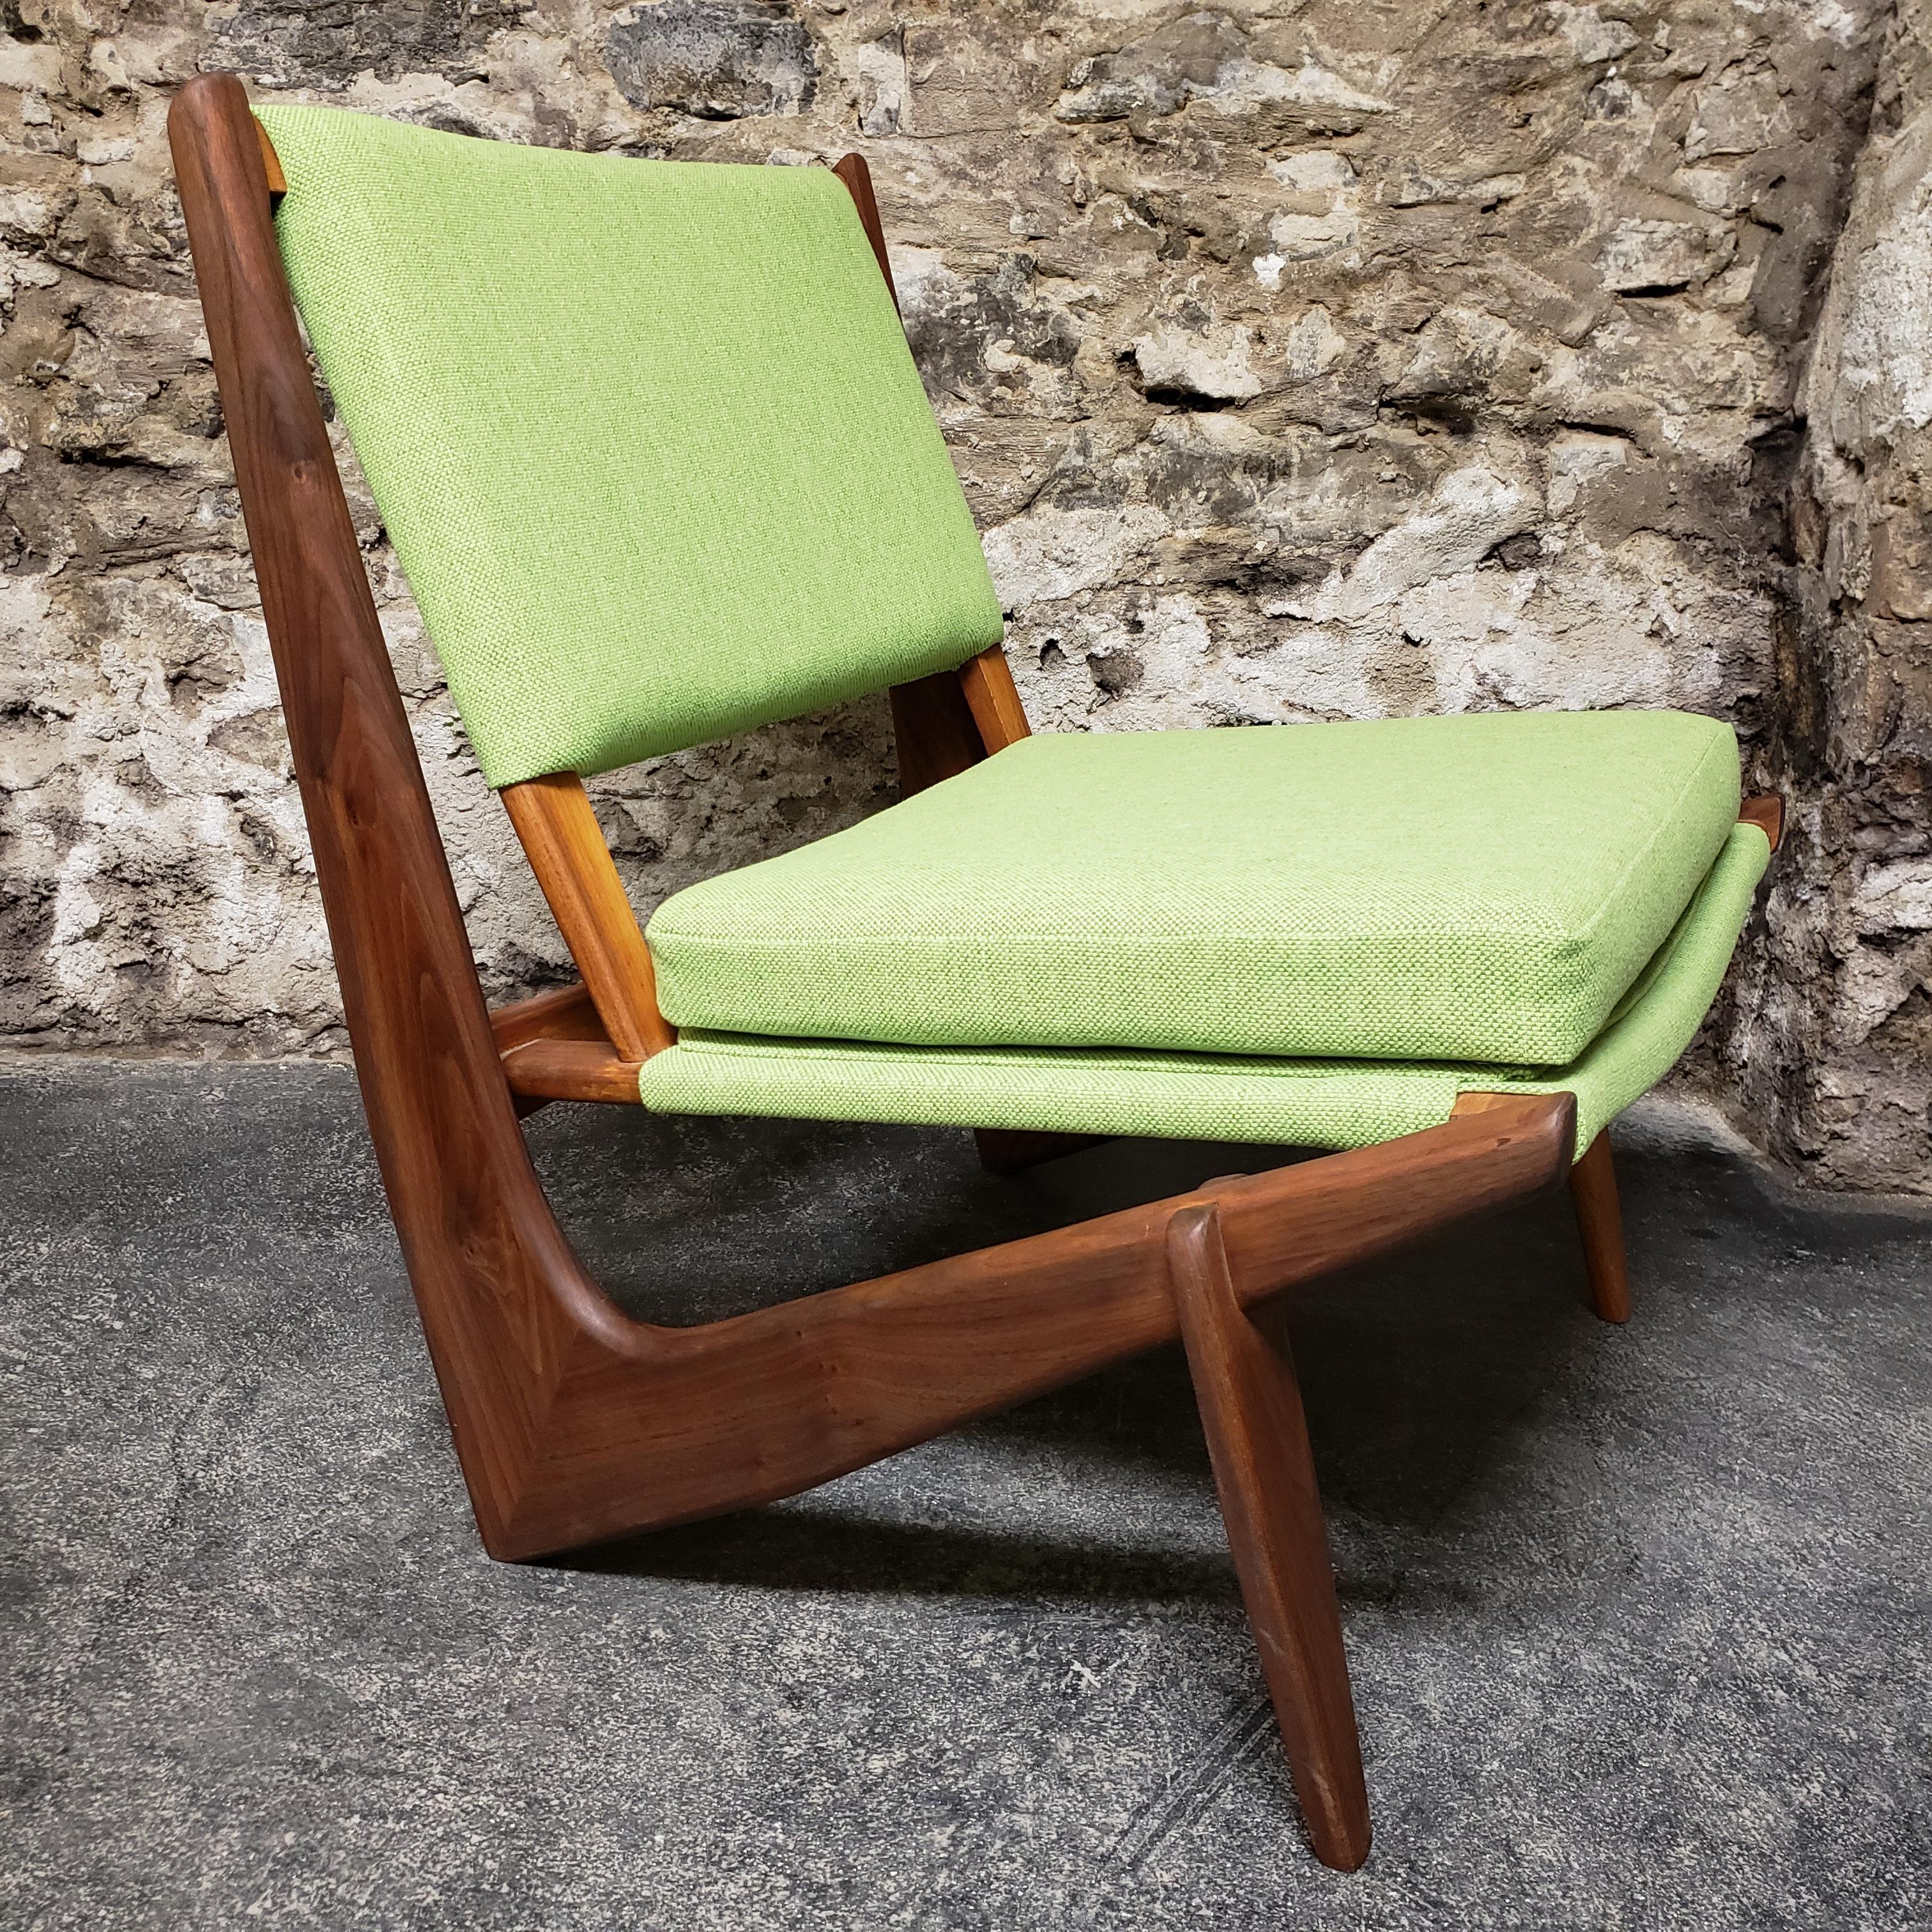 This lounge chair was designed by Bertil W. Behrman for Swedish manufacturer AB Engens Fabriker. The model name is 233 and comes from the Presens series. The chair is made out of walnut and reupholstered in a Maharam fabric. This is a highly